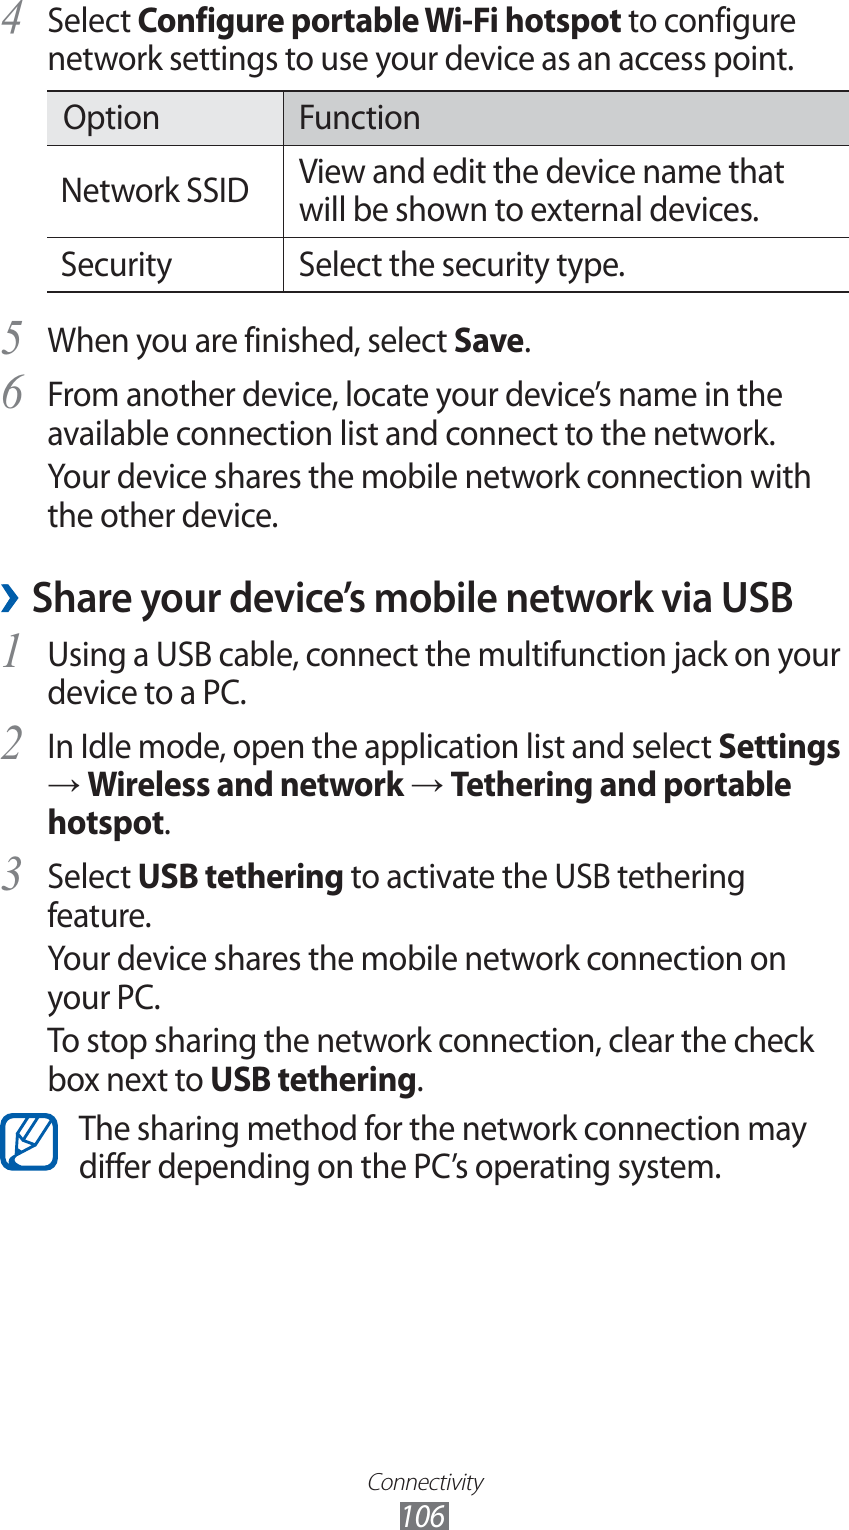 Connectivity106Select 4 Configure portable Wi-Fi hotspot to configure network settings to use your device as an access point.Option FunctionNetwork SSID View and edit the device name that will be shown to external devices.Security Select the security type.When you are finished, select 5 Save.From another device, locate your device’s name in the 6 available connection list and connect to the network.Your device shares the mobile network connection with the other device. ›Share your device’s mobile network via USBUsing a USB cable, connect the multifunction jack on your 1 device to a PC.In Idle mode, open the application list and select 2 Settings → Wireless and network → Tethering and portable hotspot.Select 3 USB tethering to activate the USB tethering feature.Your device shares the mobile network connection on your PC.To stop sharing the network connection, clear the check box next to USB tethering.The sharing method for the network connection may differ depending on the PC’s operating system.